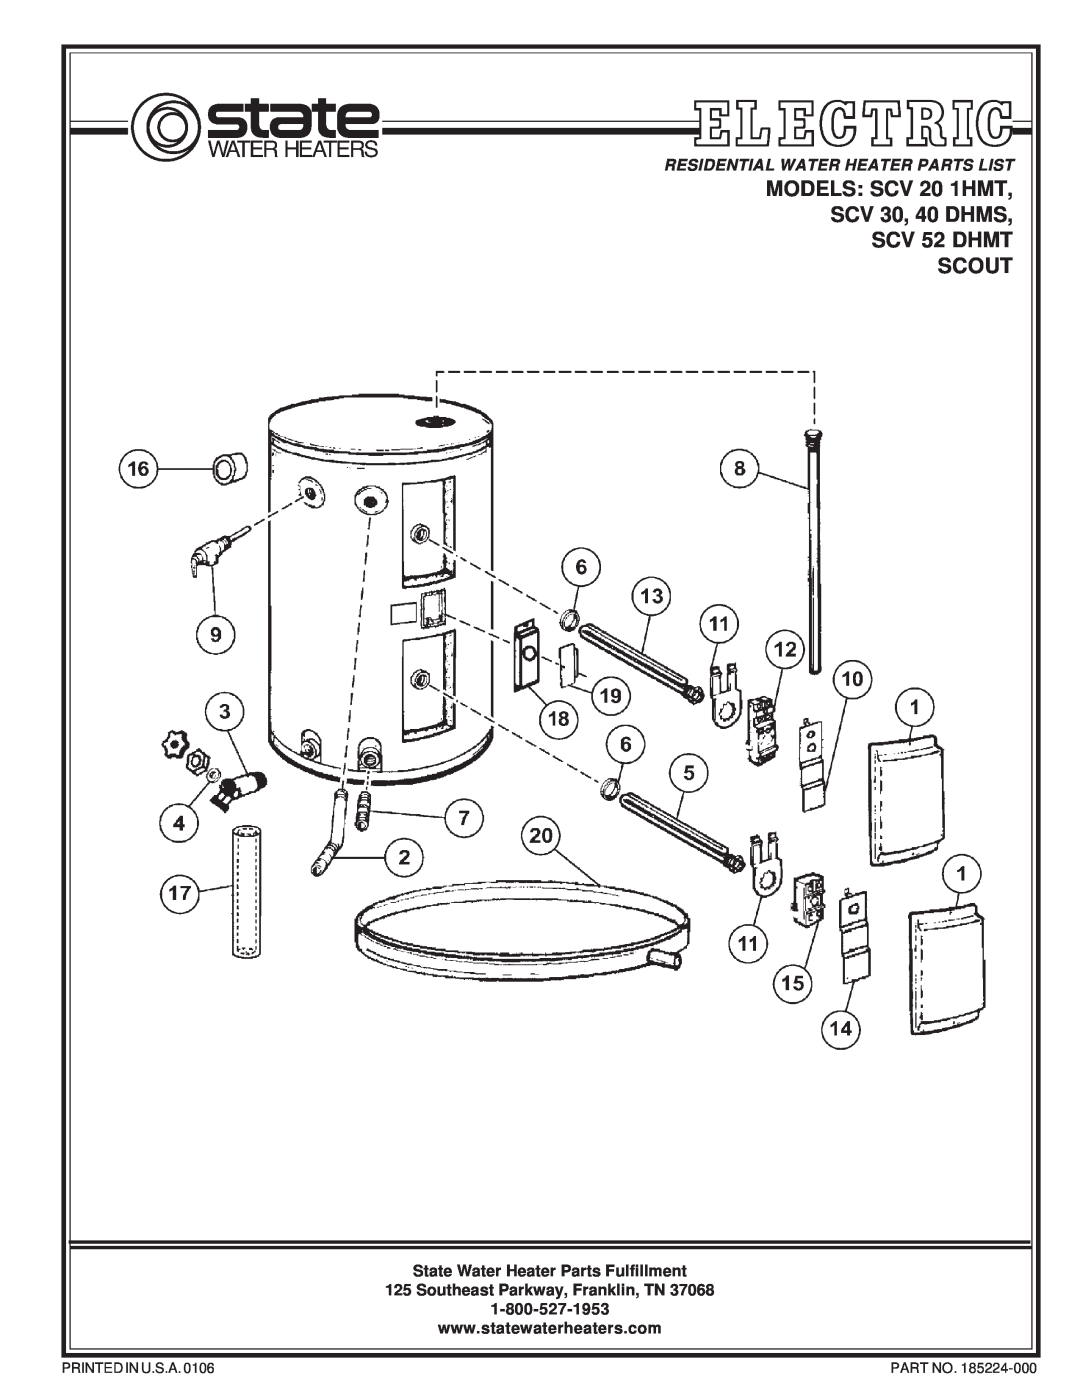 State Industries SCV 30, SCV 52 DHMT manual State Water Heater Parts Fulfillment, Southeast Parkway, Franklin, TN, Scout 